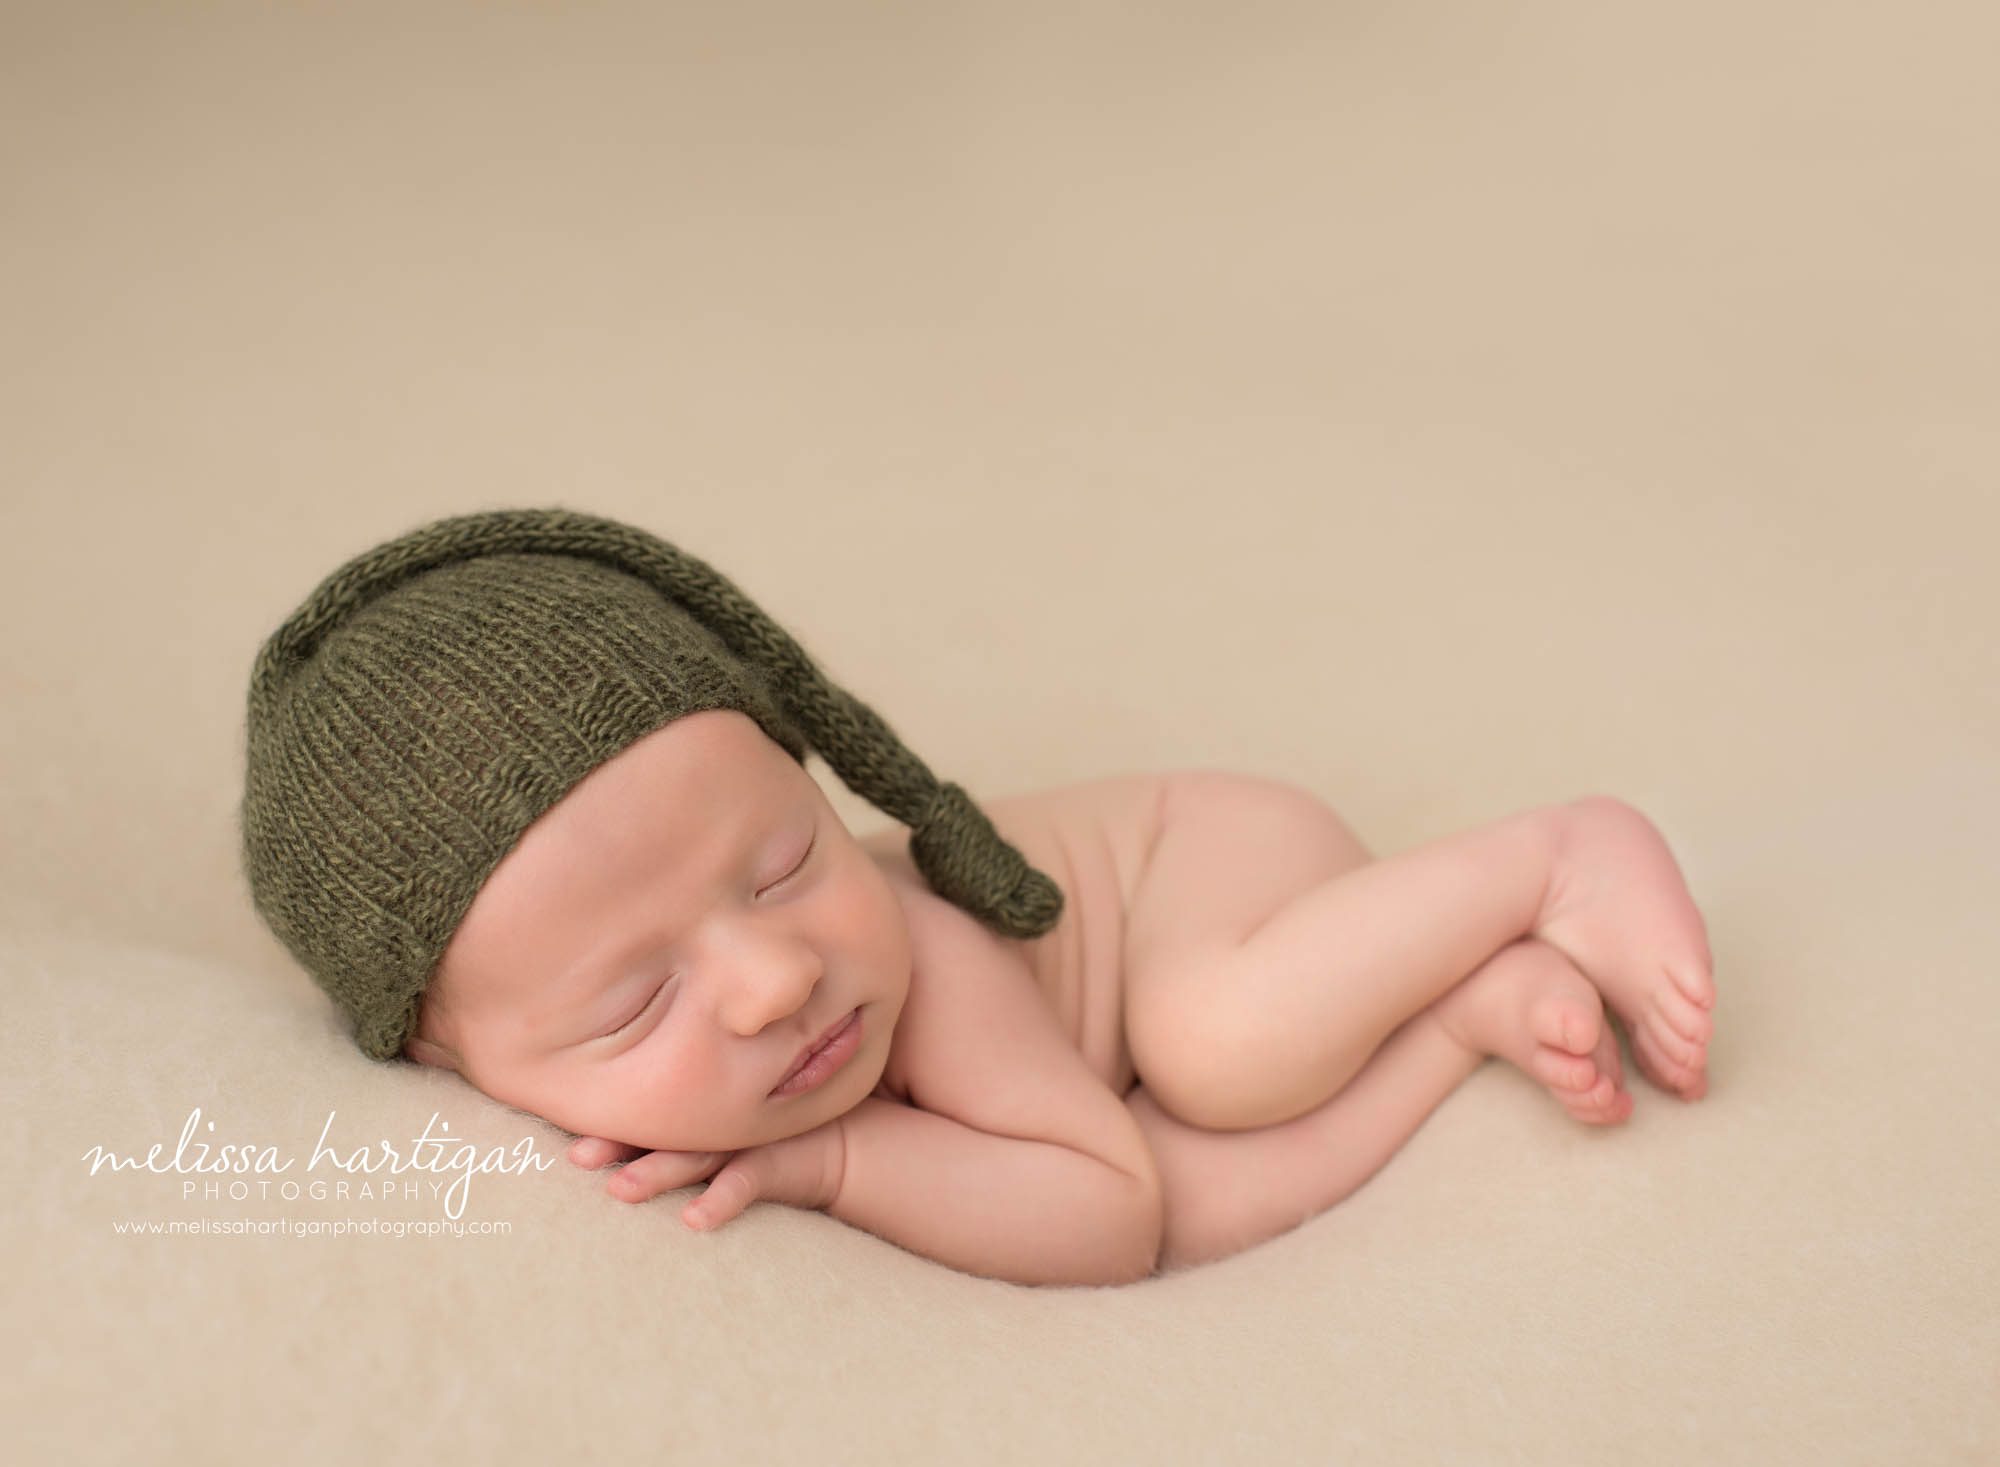 Nebworn baby boy posed on side with knitted green sleepy cap